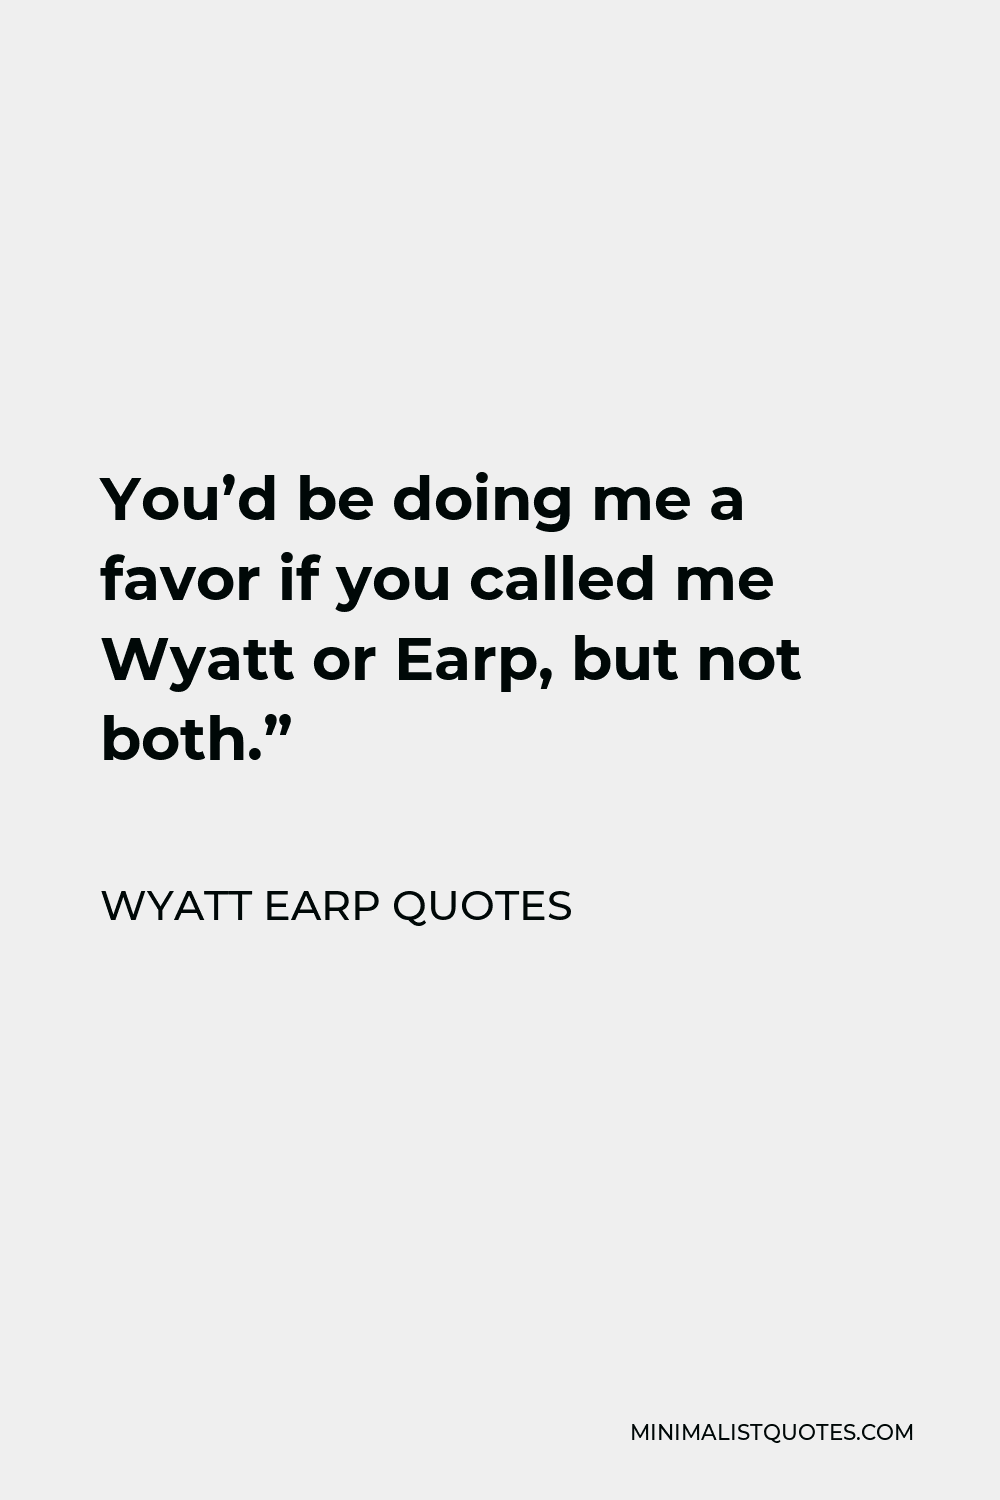 Wyatt Earp Quotes Quote - You’d be doing me a favor if you called me Wyatt or Earp, but not both.”